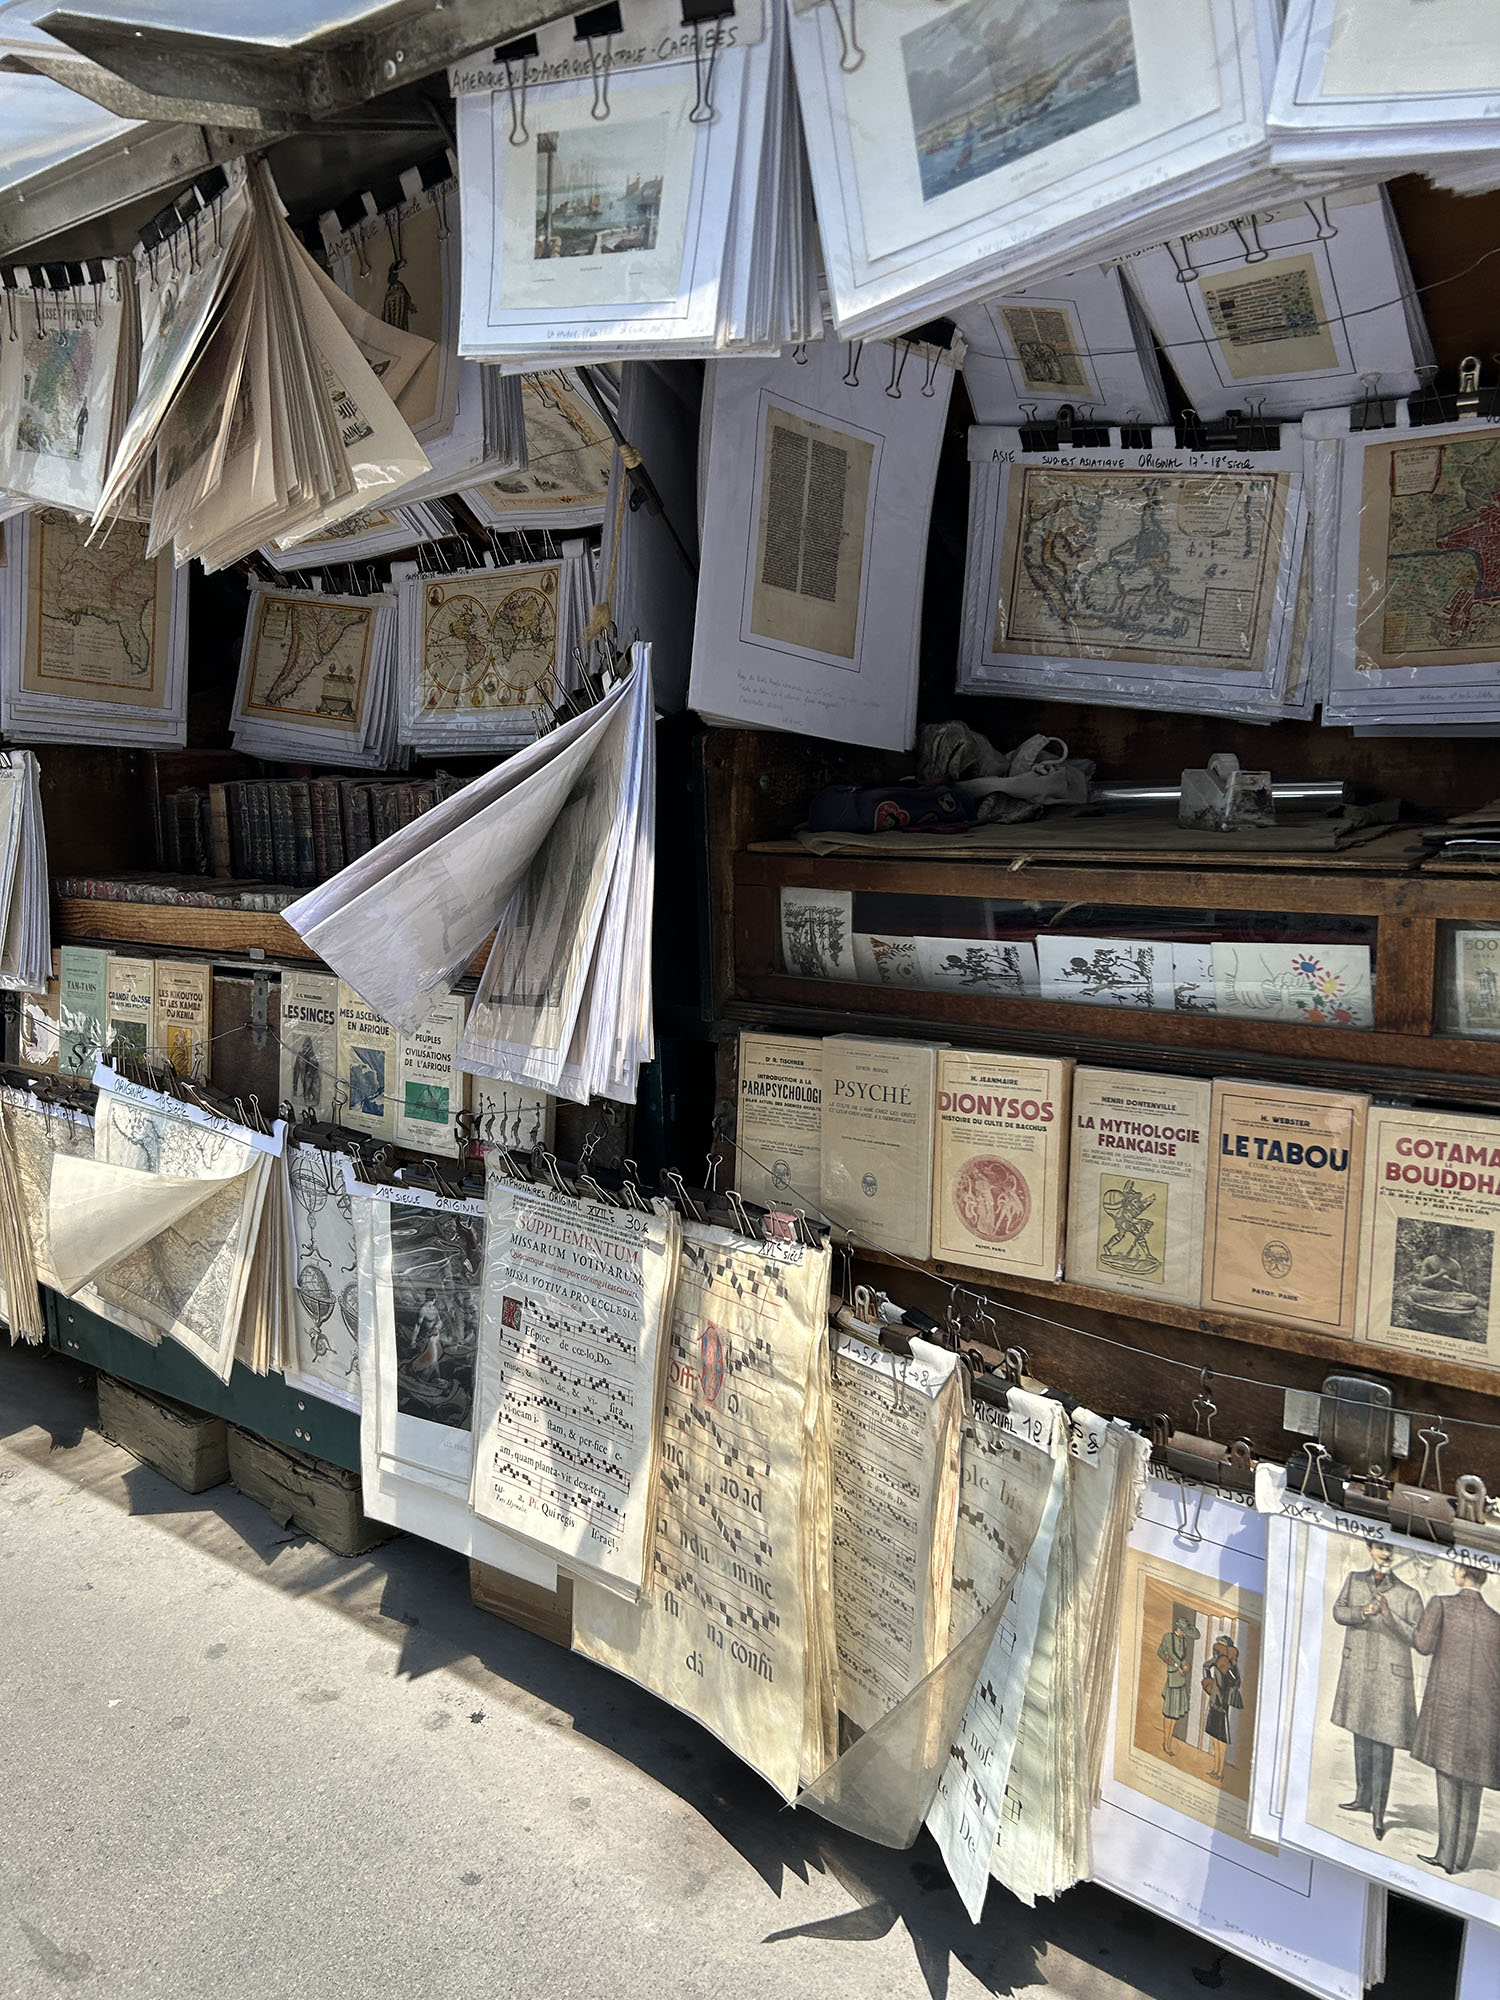 Coco & Voltaire - Vintage books and posters at a bouquiniste shop along the left bank of the Seine in Paris